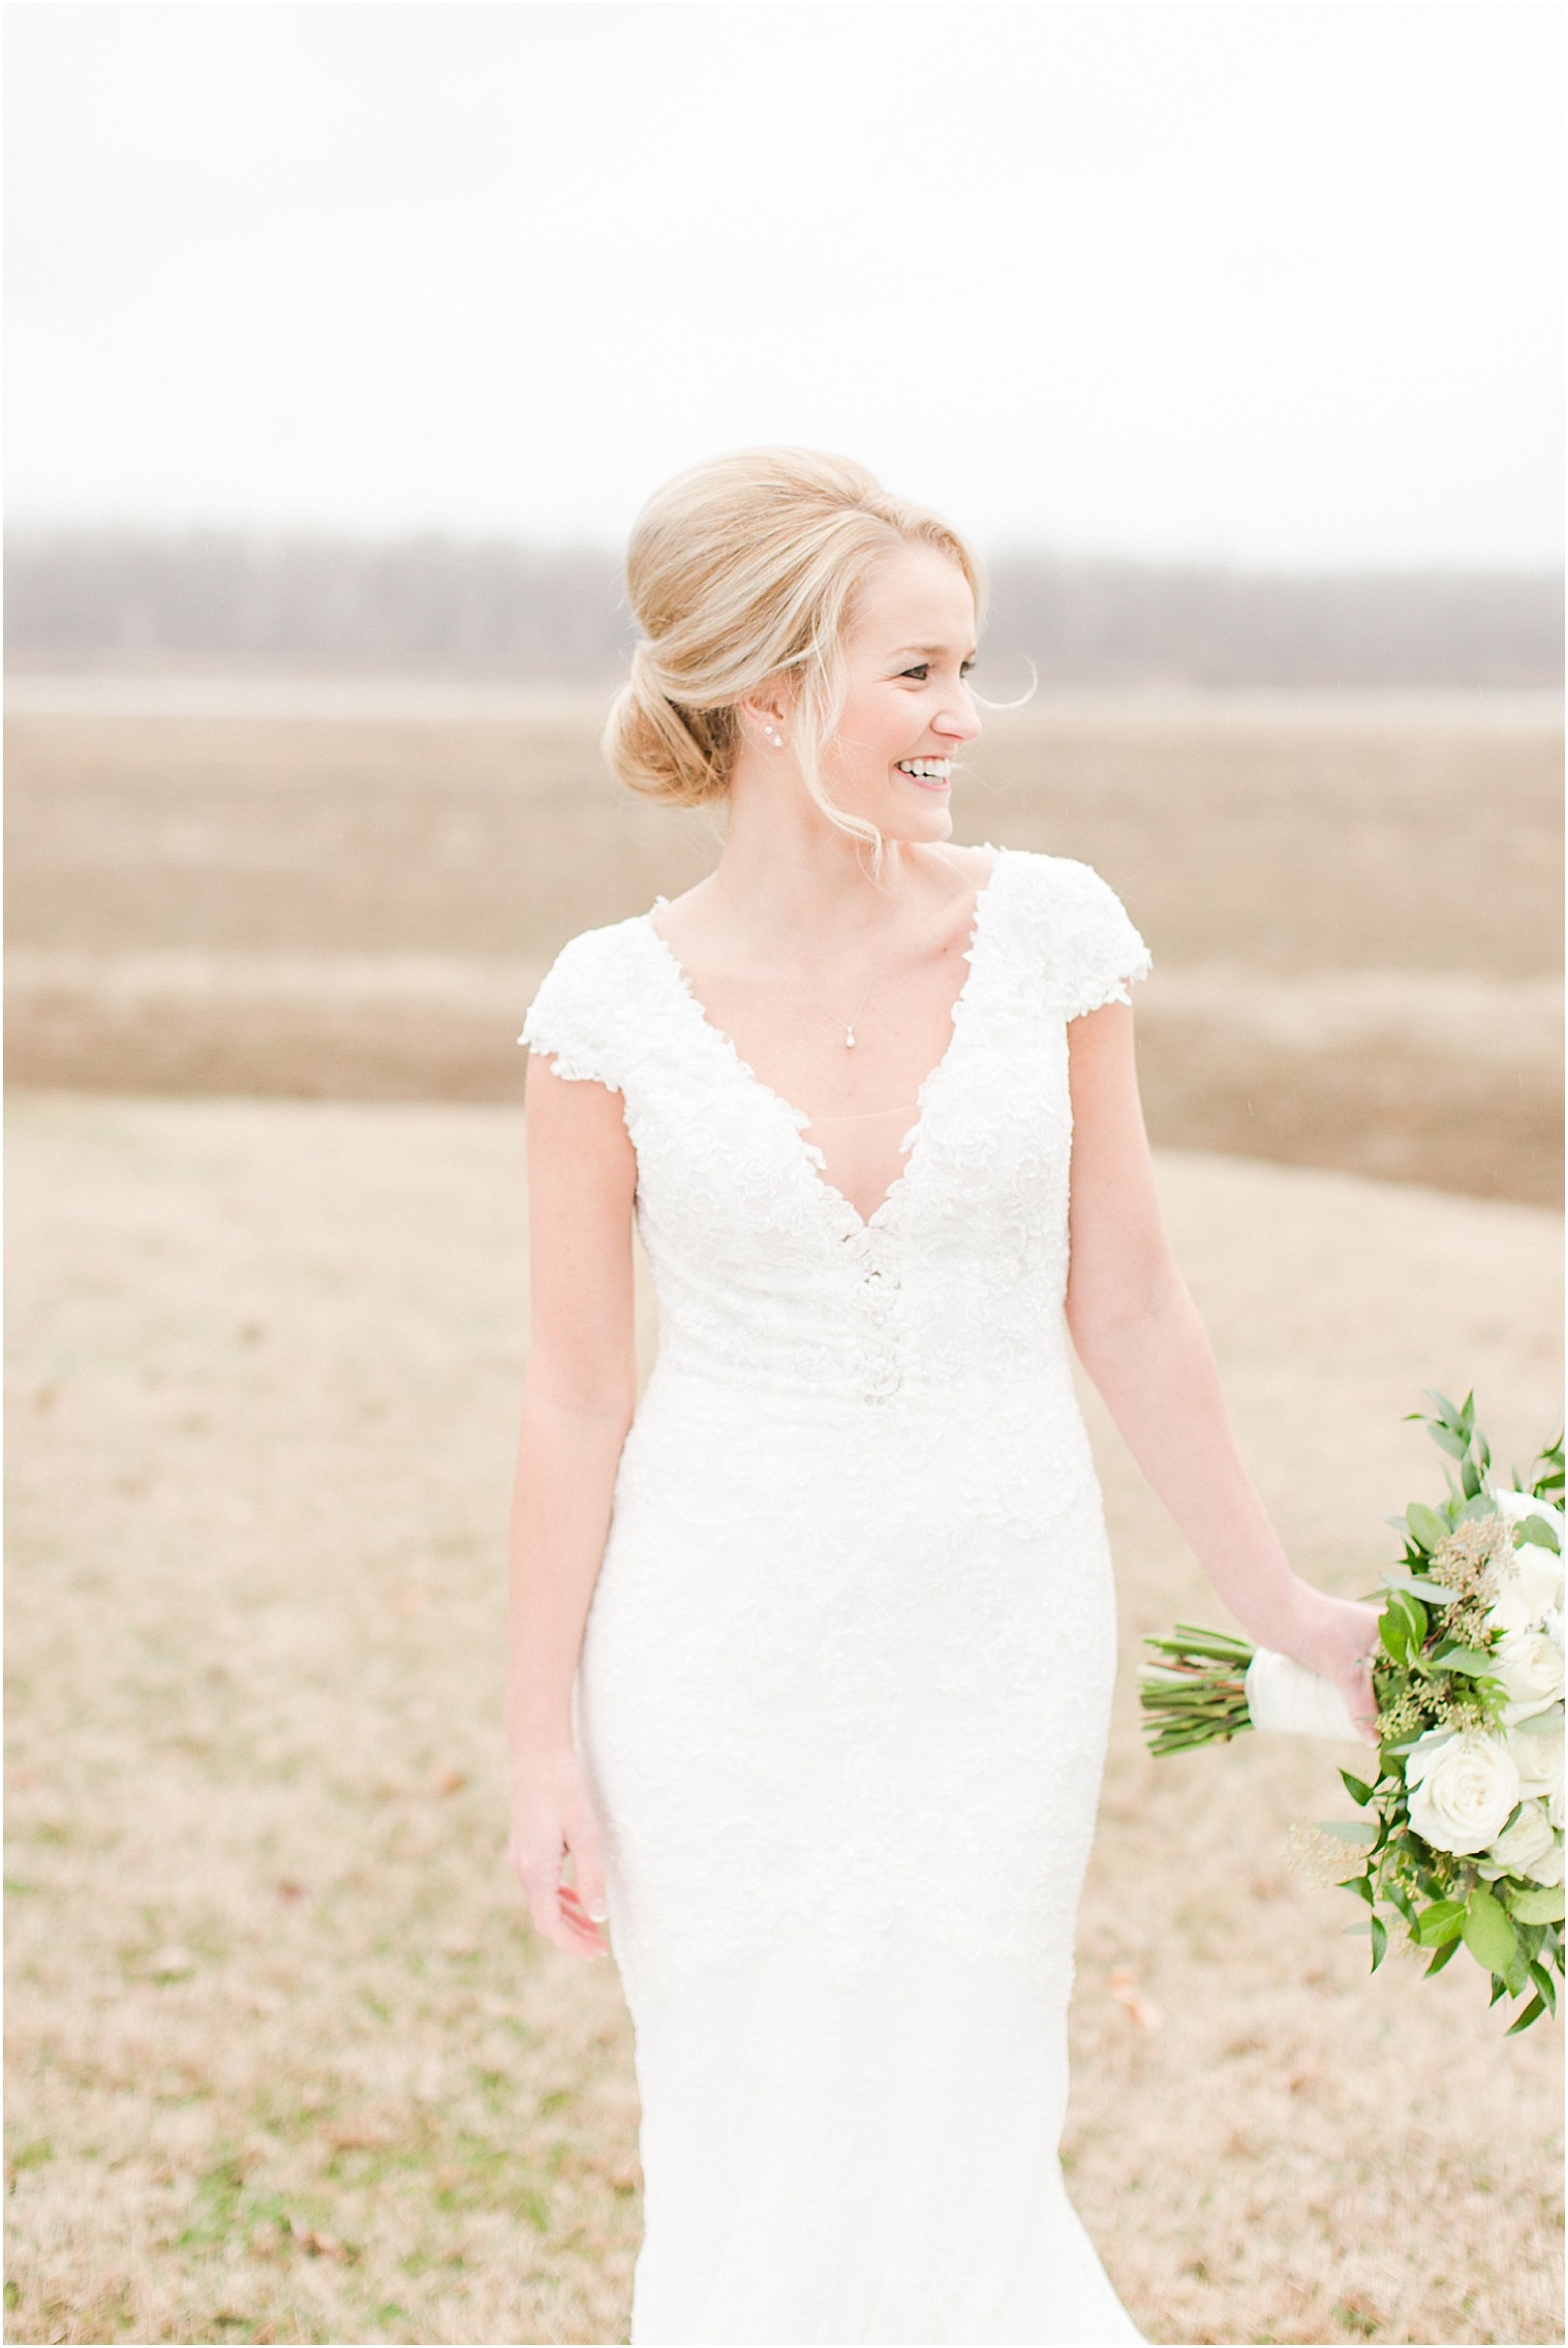 A Classic Winter Wedding in New Harmony | Rachel and Ryan | Bret and Brandie Photography 0085.jpg